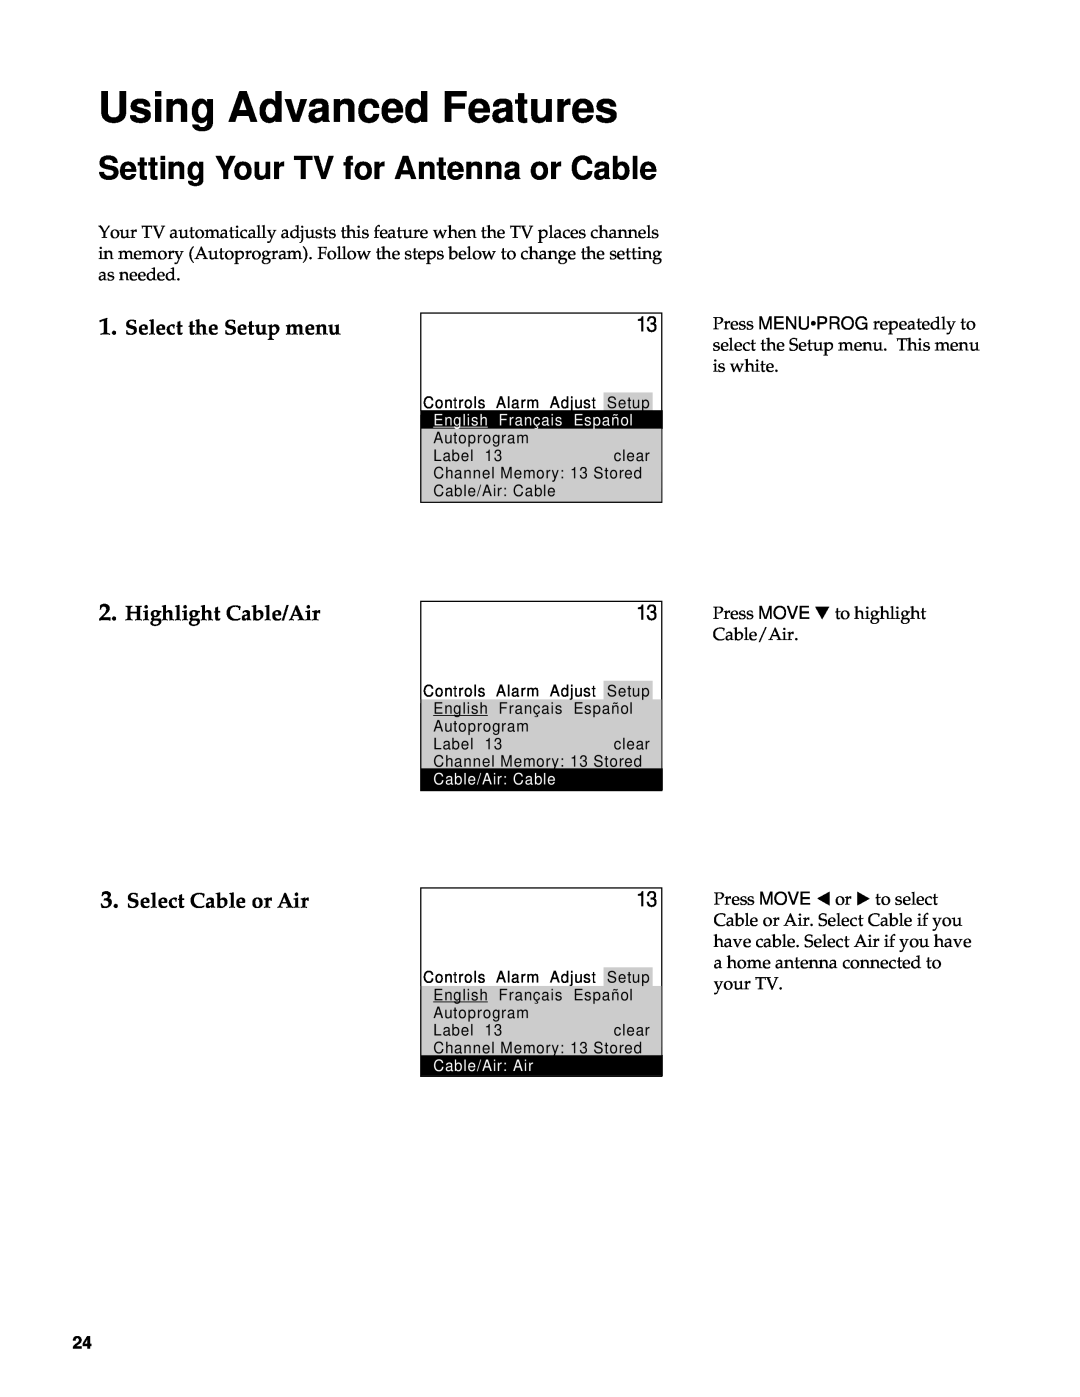 RCA Color TV manual Setting Your TV for Antenna or Cable, Select the Setup menu, Highlight Cable/Air, Select Cable or Air 